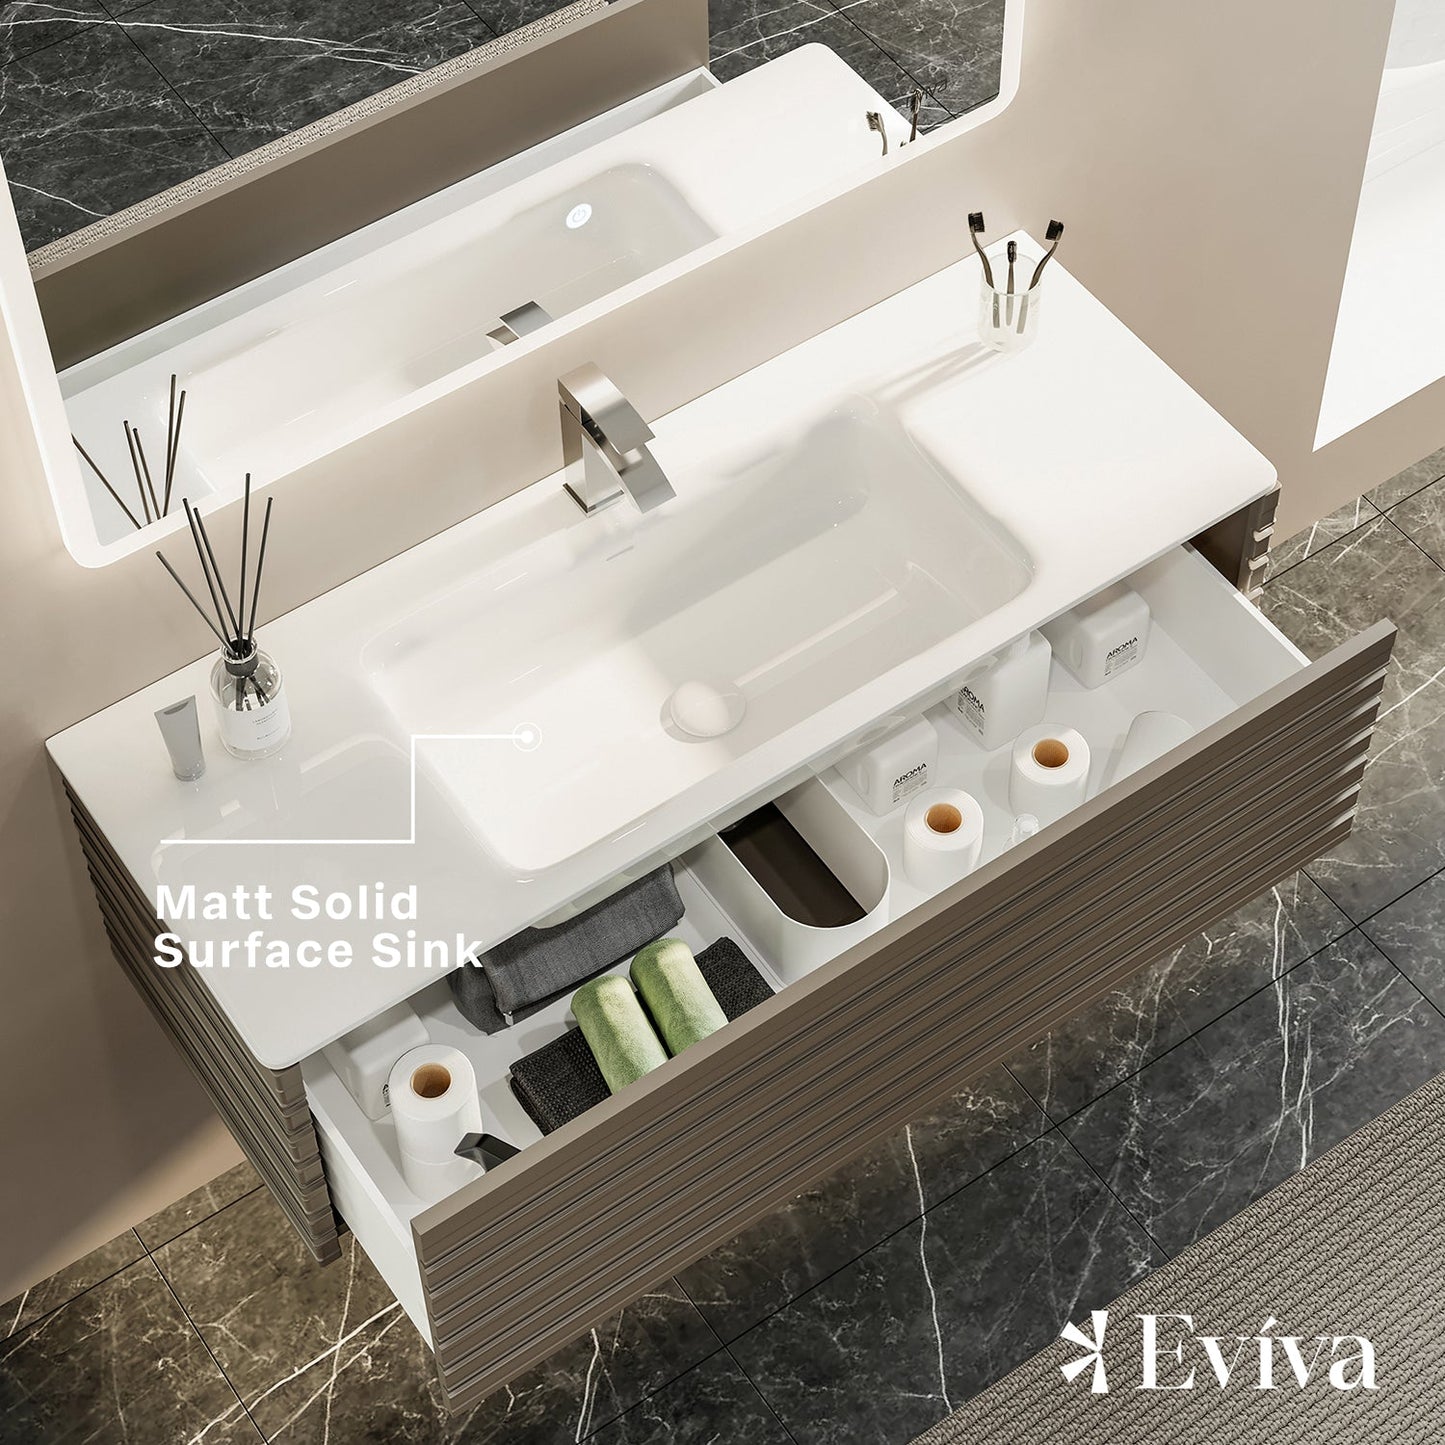 Eviva Dream 42 Smog Grey Wall Mount Vanity with Solid Surface Integrated Sink